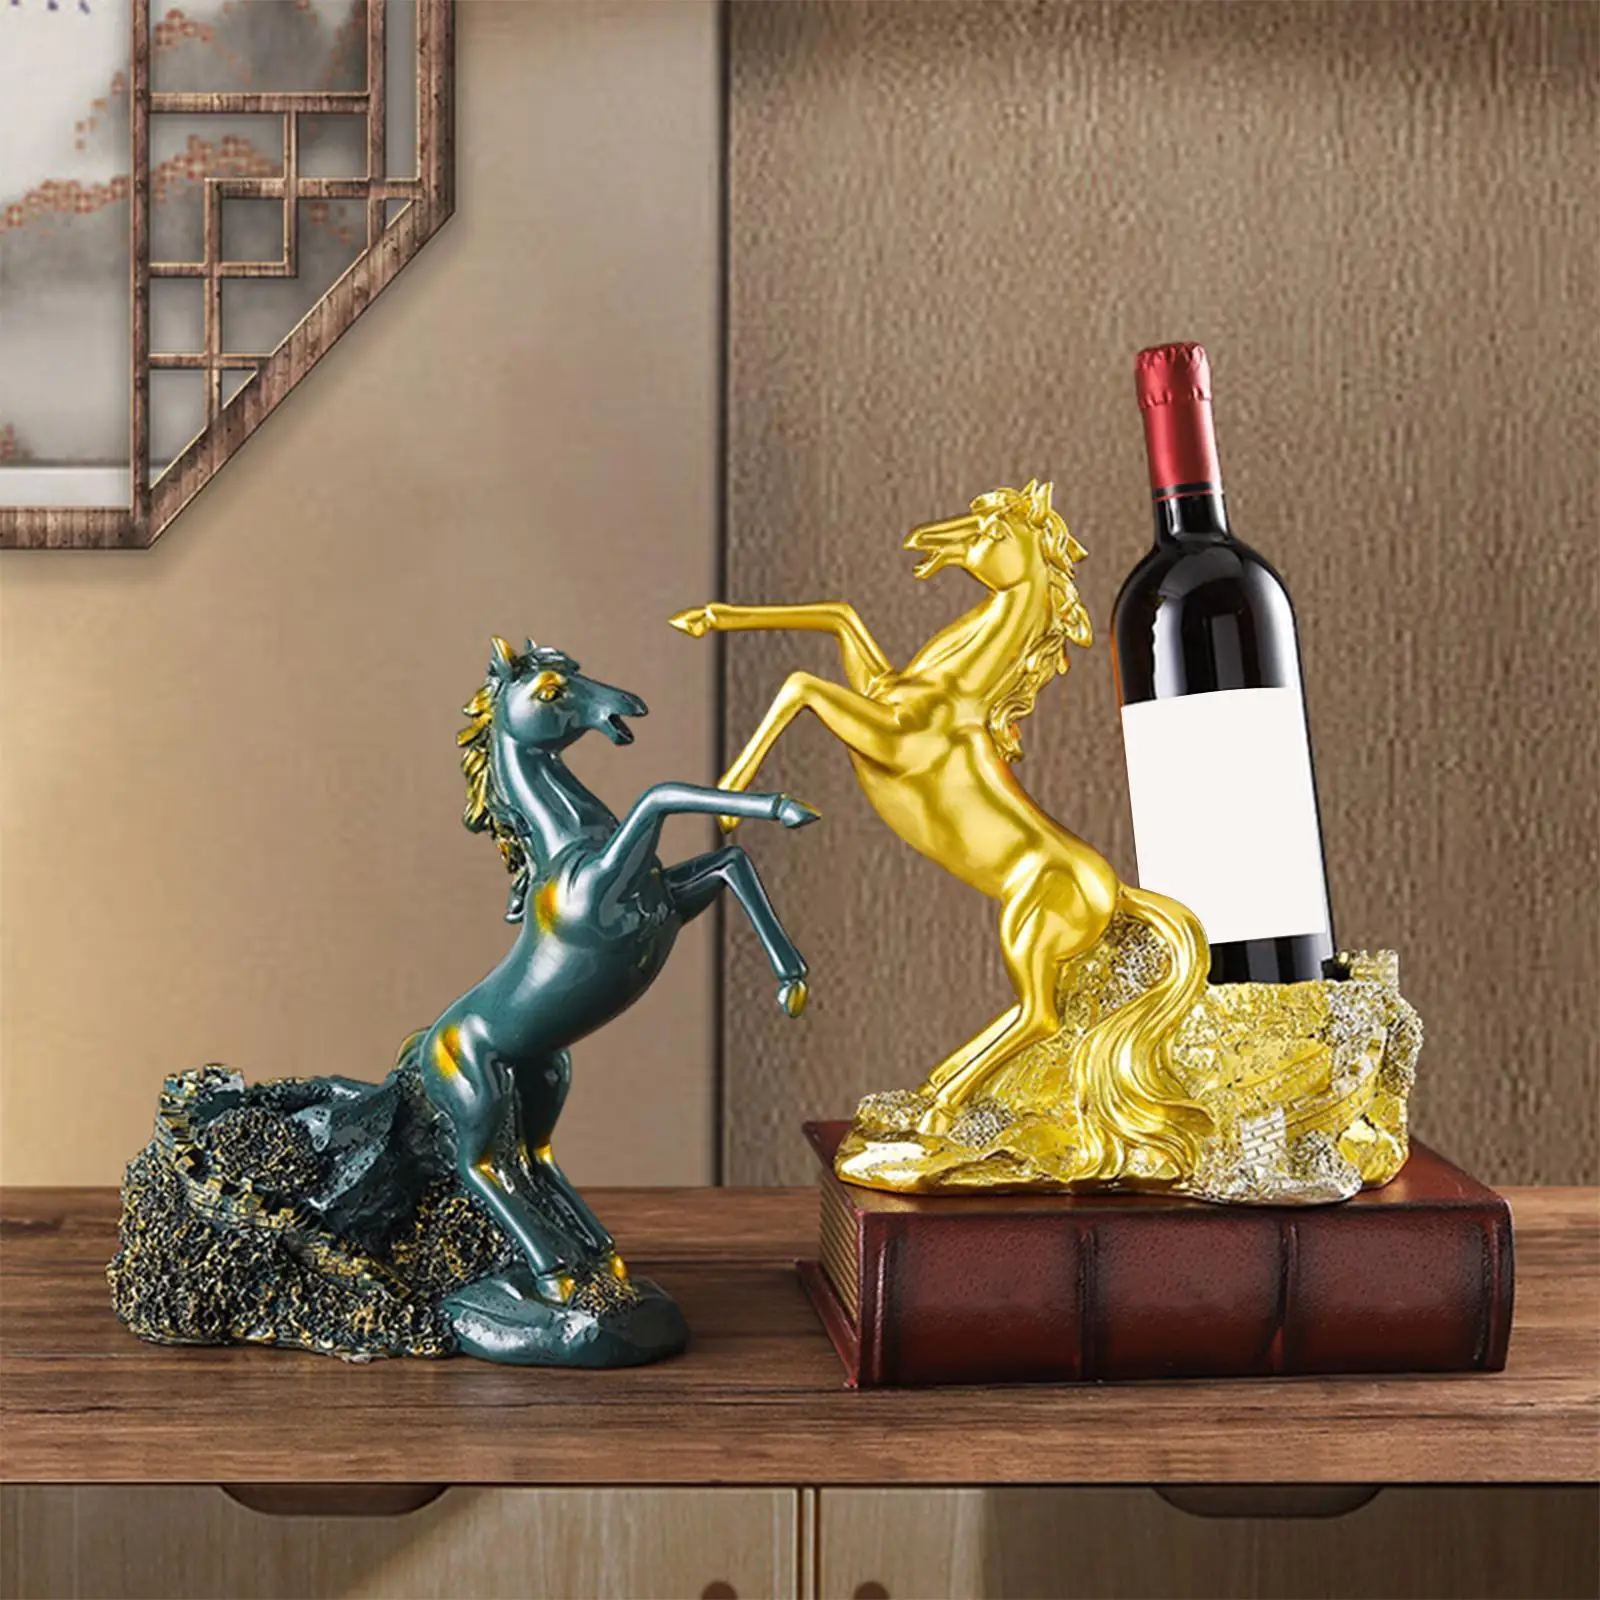 Wine Rack Horse Statues Nordic Style Wine Bottle Holder Stand Decorative Wine Display Shelf for Party Decorations